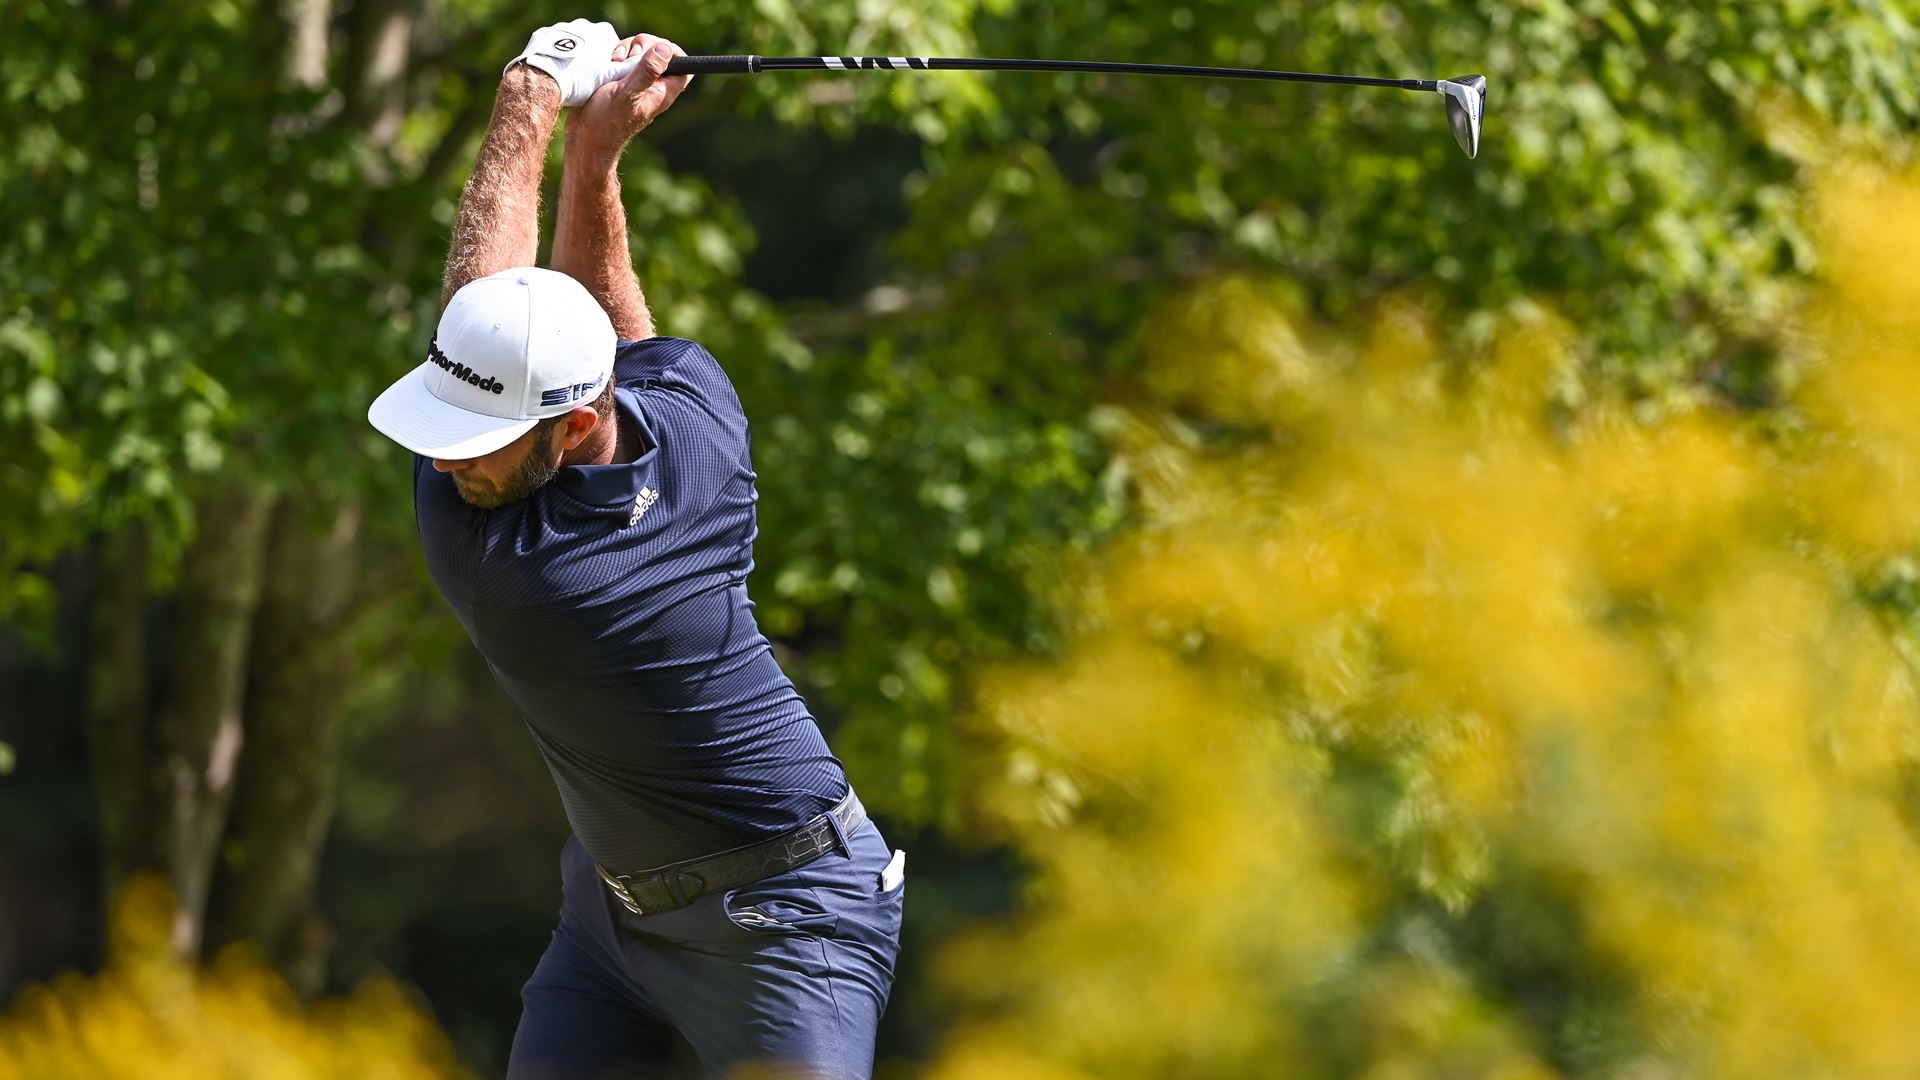 Dustin Johnson Wins The Northern Trust With SIM Driver and TP5x Ball